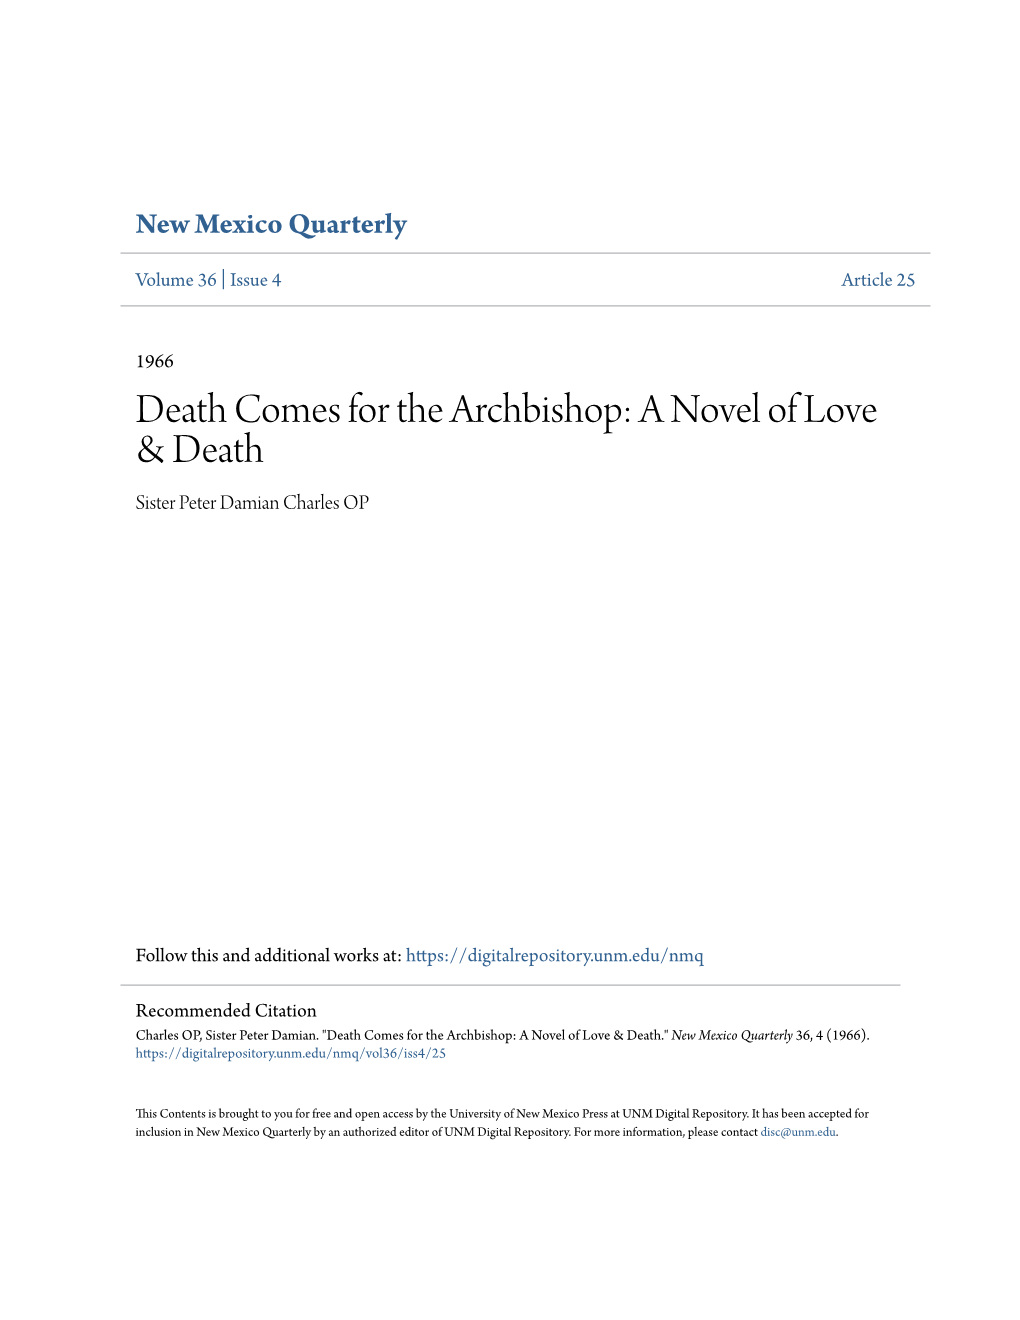 Death Comes for the Archbishop: a Novel of Love & Death